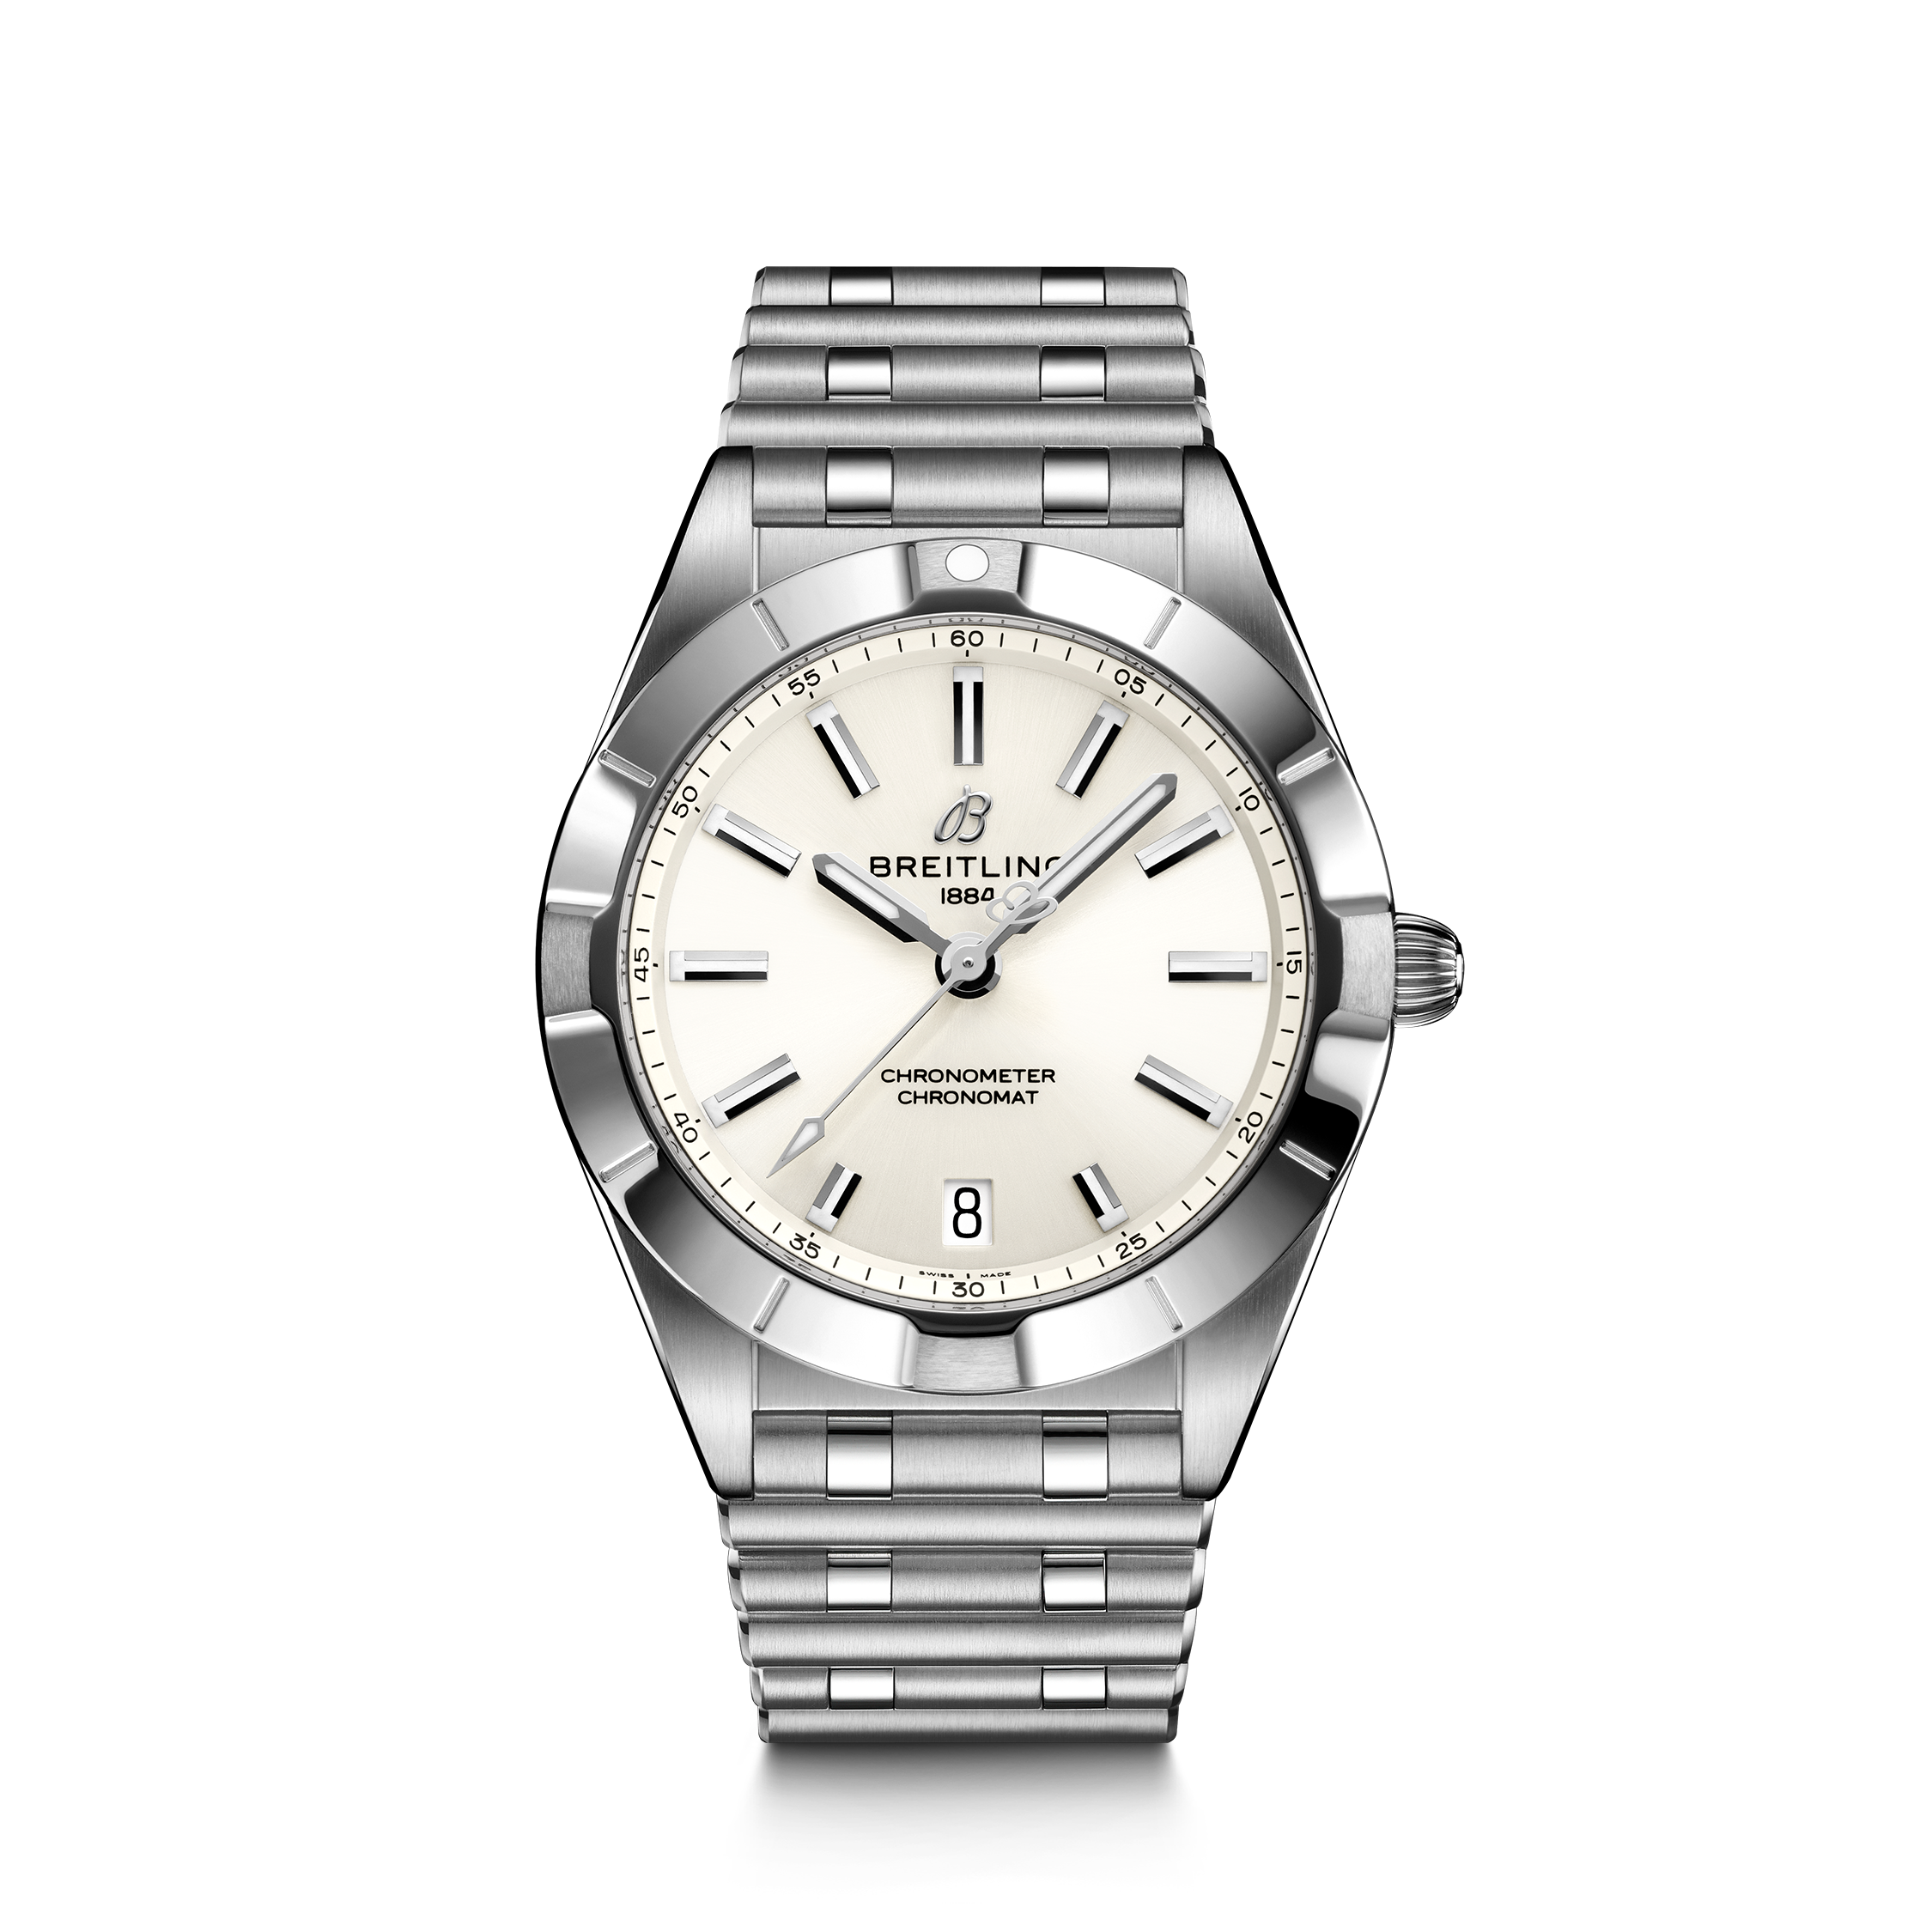 Breitling women's Chronomat 32MM watch with stainless steel bracelet, bezel and white dial.